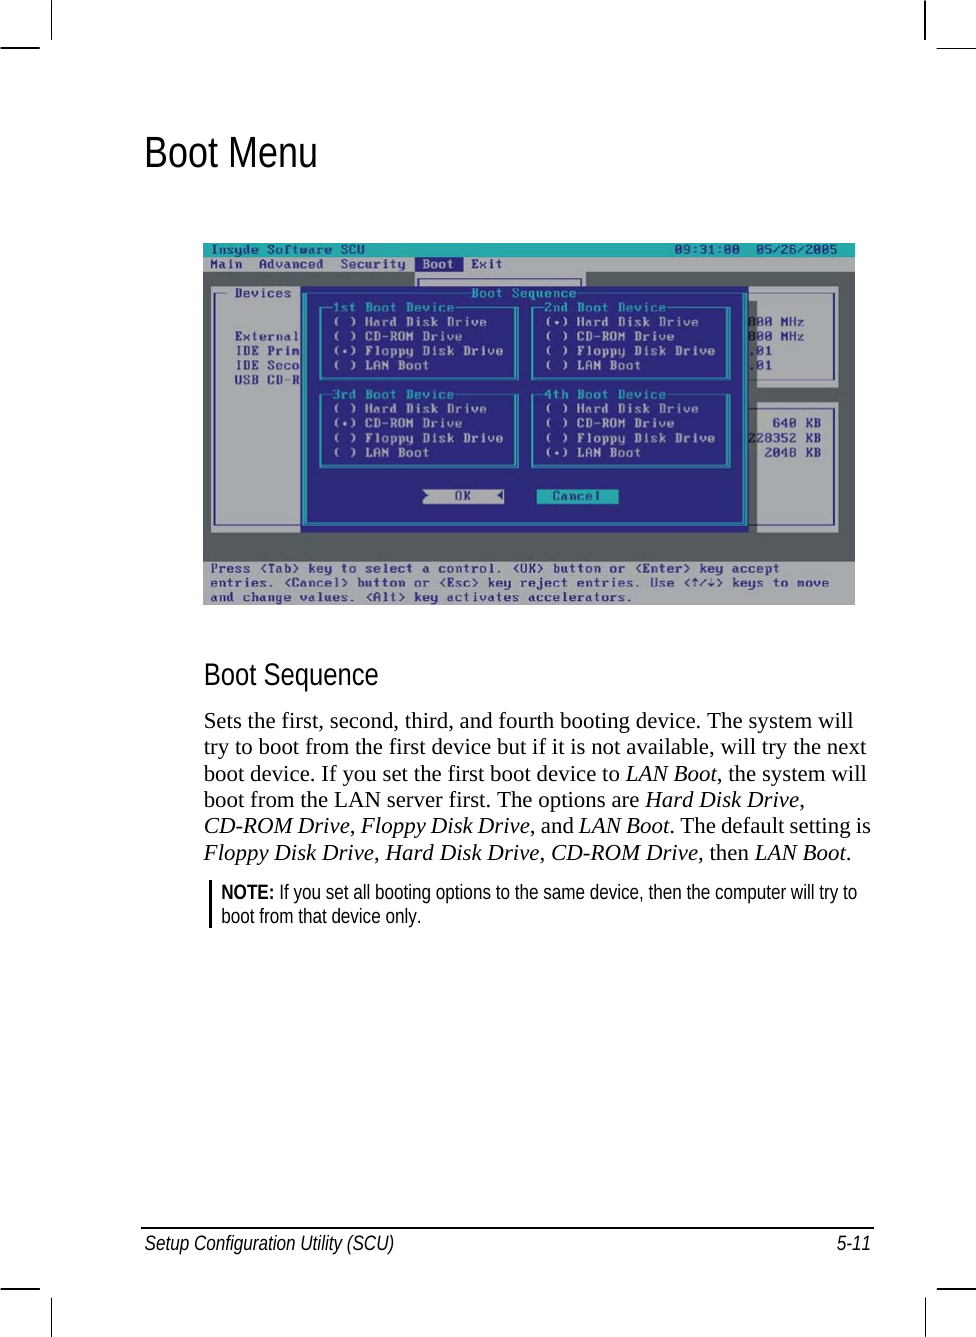  Boot Menu  Boot Sequence Sets the first, second, third, and fourth booting device. The system will try to boot from the first device but if it is not available, will try the next boot device. If you set the first boot device to LAN Boot, the system will boot from the LAN server first. The options are Hard Disk Drive, CD-ROM Drive, Floppy Disk Drive, and LAN Boot. The default setting is Floppy Disk Drive, Hard Disk Drive, CD-ROM Drive, then LAN Boot. NOTE: If you set all booting options to the same device, then the computer will try to boot from that device only.  Setup Configuration Utility (SCU)  5-11 